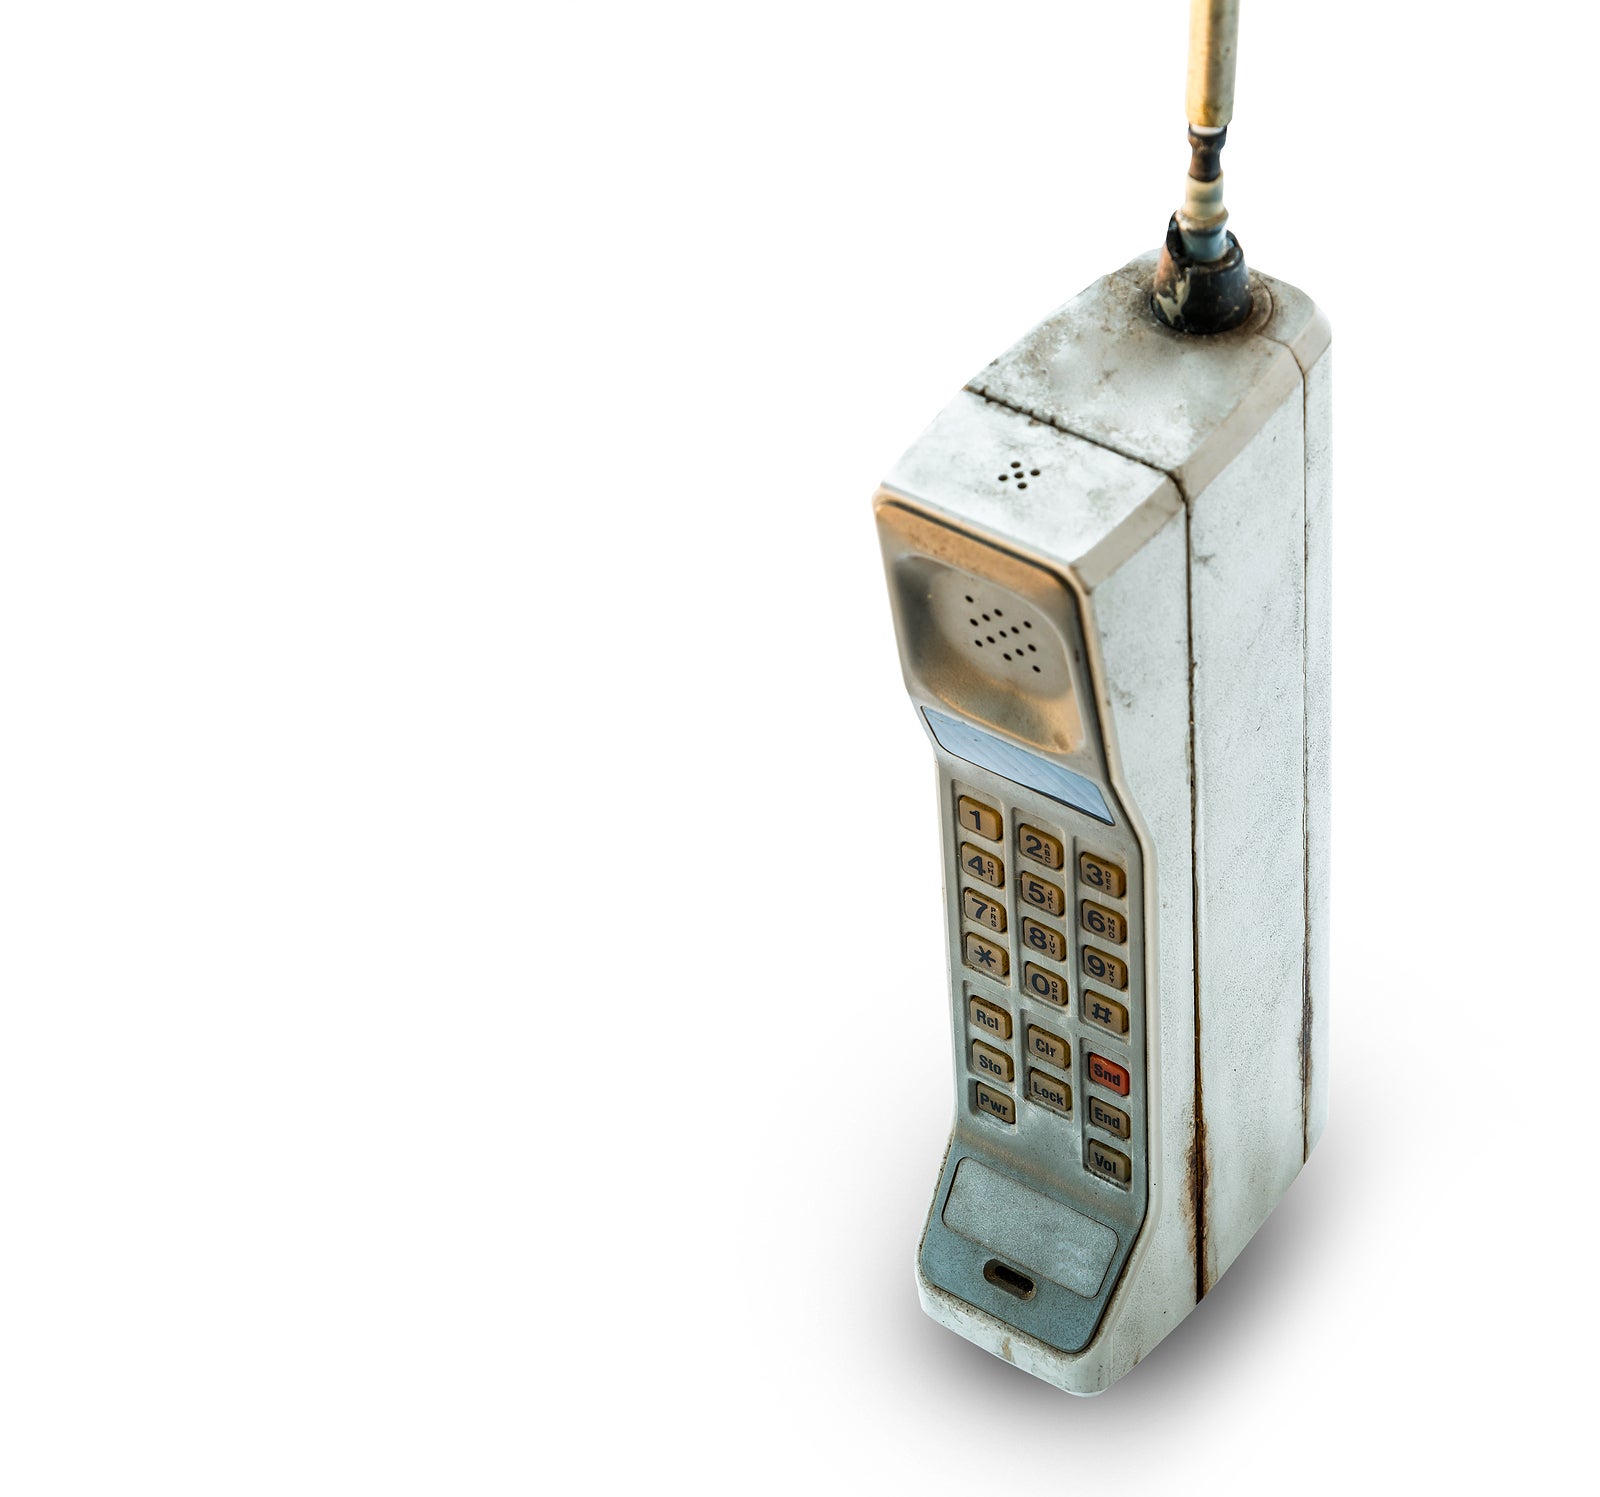 first cell phones